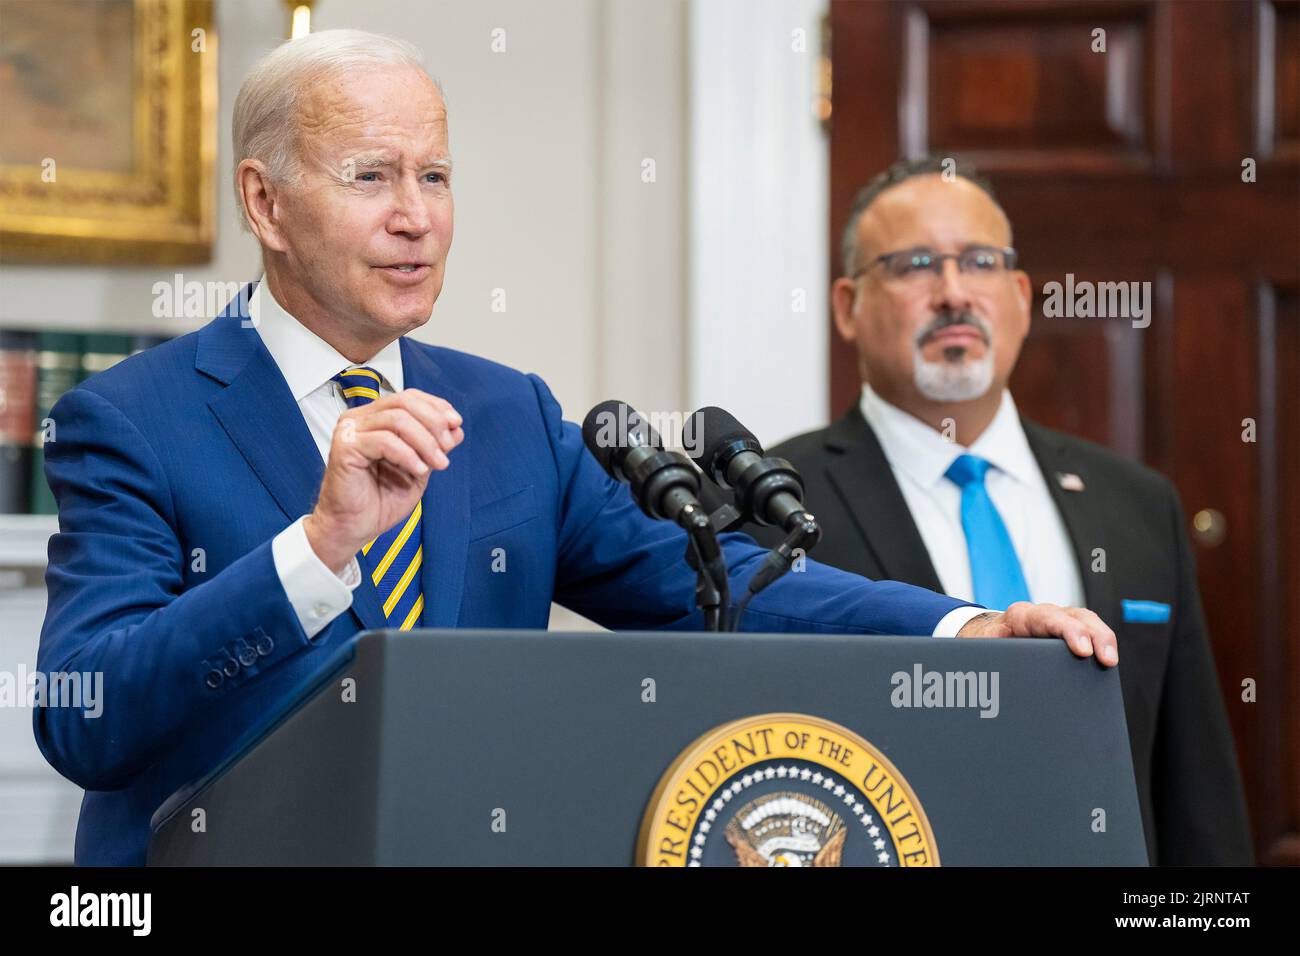 Washington, United States Of America. 24th Aug, 2022. Washington, United States of America. 24 August, 2022. U.S President Joe Biden, alongside Education Secretary Miguel Cardona, right, announces a plan on student loan debt forgiveness from the Roosevelt Room of the White House, August 24, 2022 in Washington, DC Credit: Adam Schultz/White House Photo/Alamy Live News Stock Photo